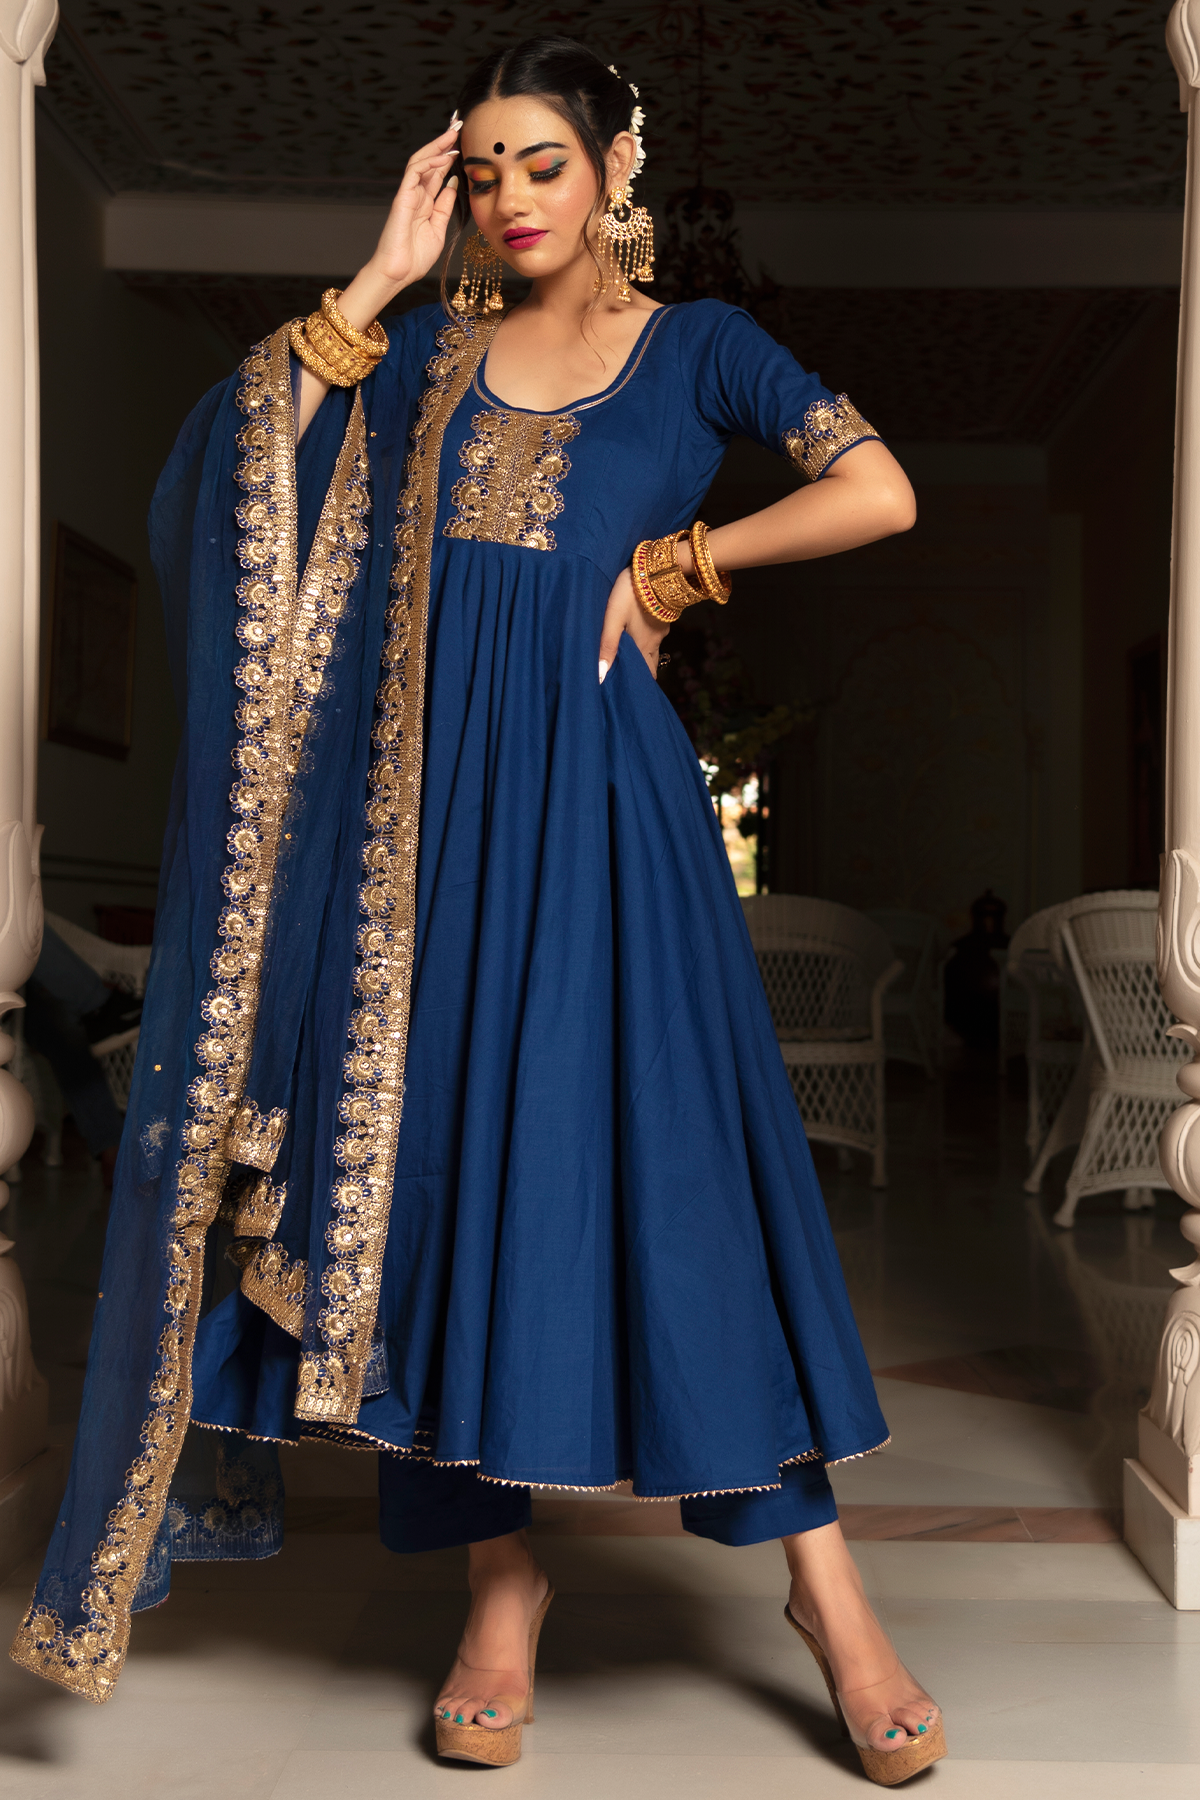 Salwar Suit For Woman And Girls Party Wear Anarkali Suit : Amazon.in: कपड़े  और एक्सेसरीज़